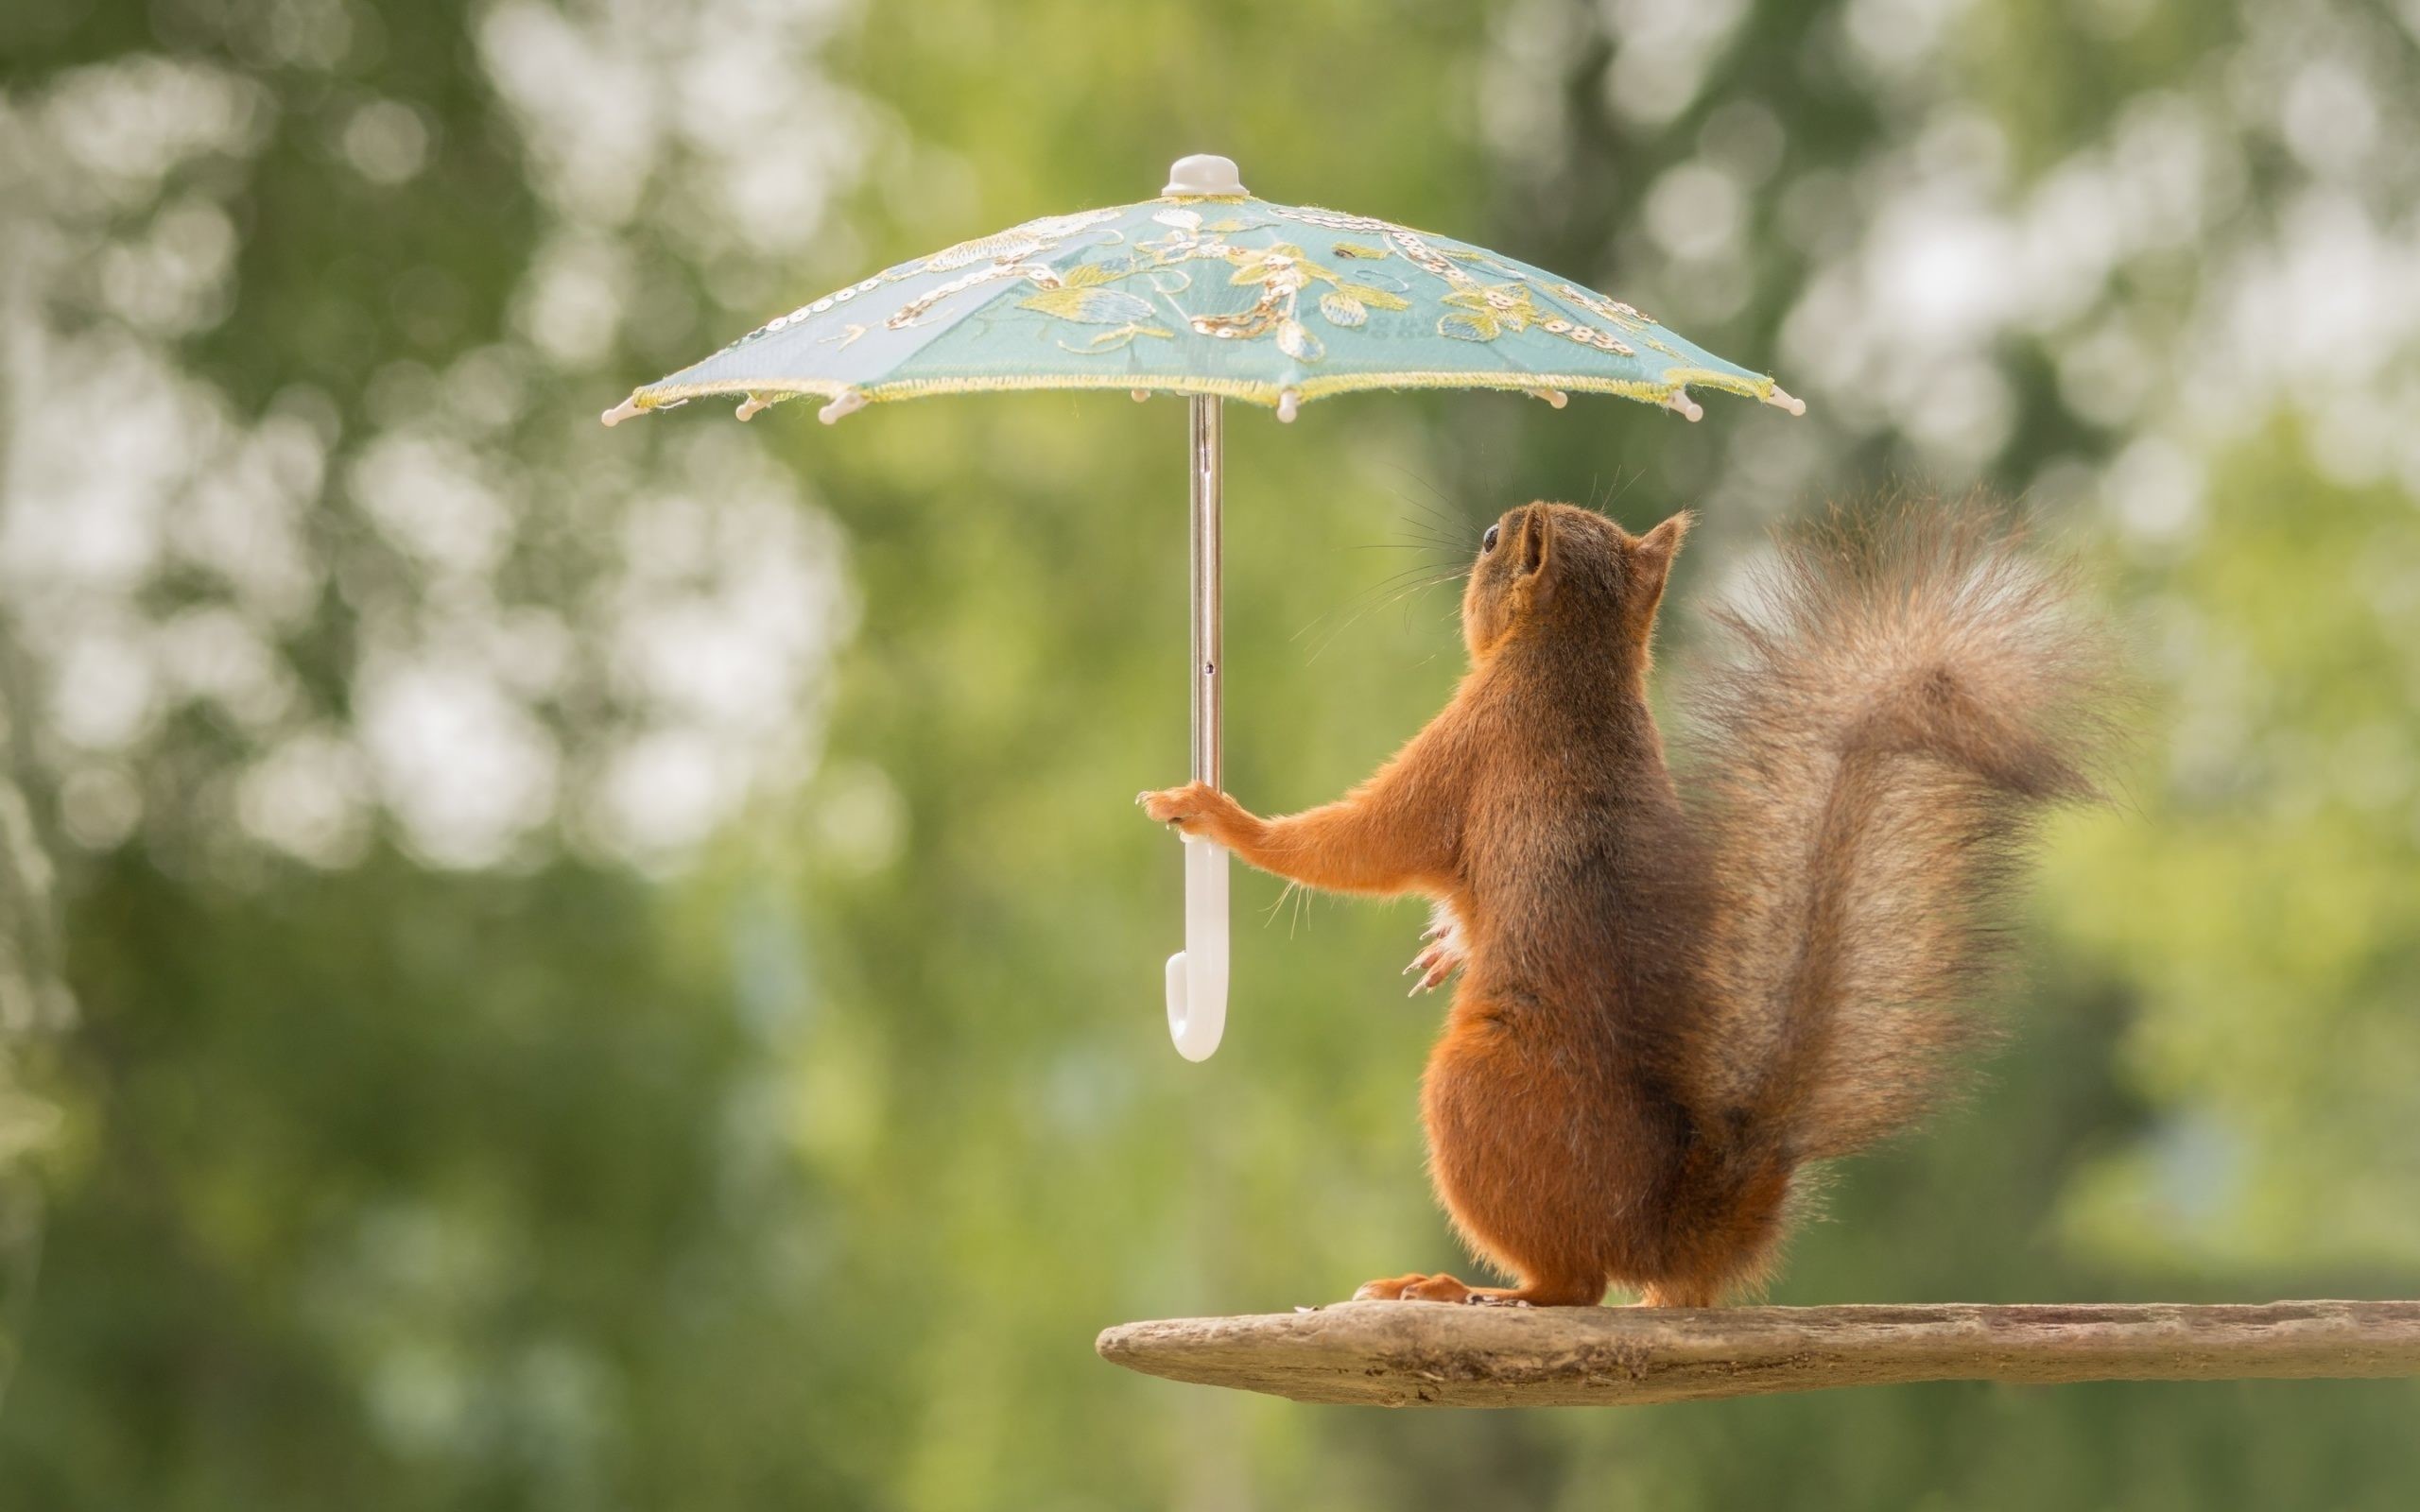 0 Funny Image Wallpapers Funny Wallpapers Backgrounds - Squirrel Hd Wallpaper 1080p - HD Wallpaper 